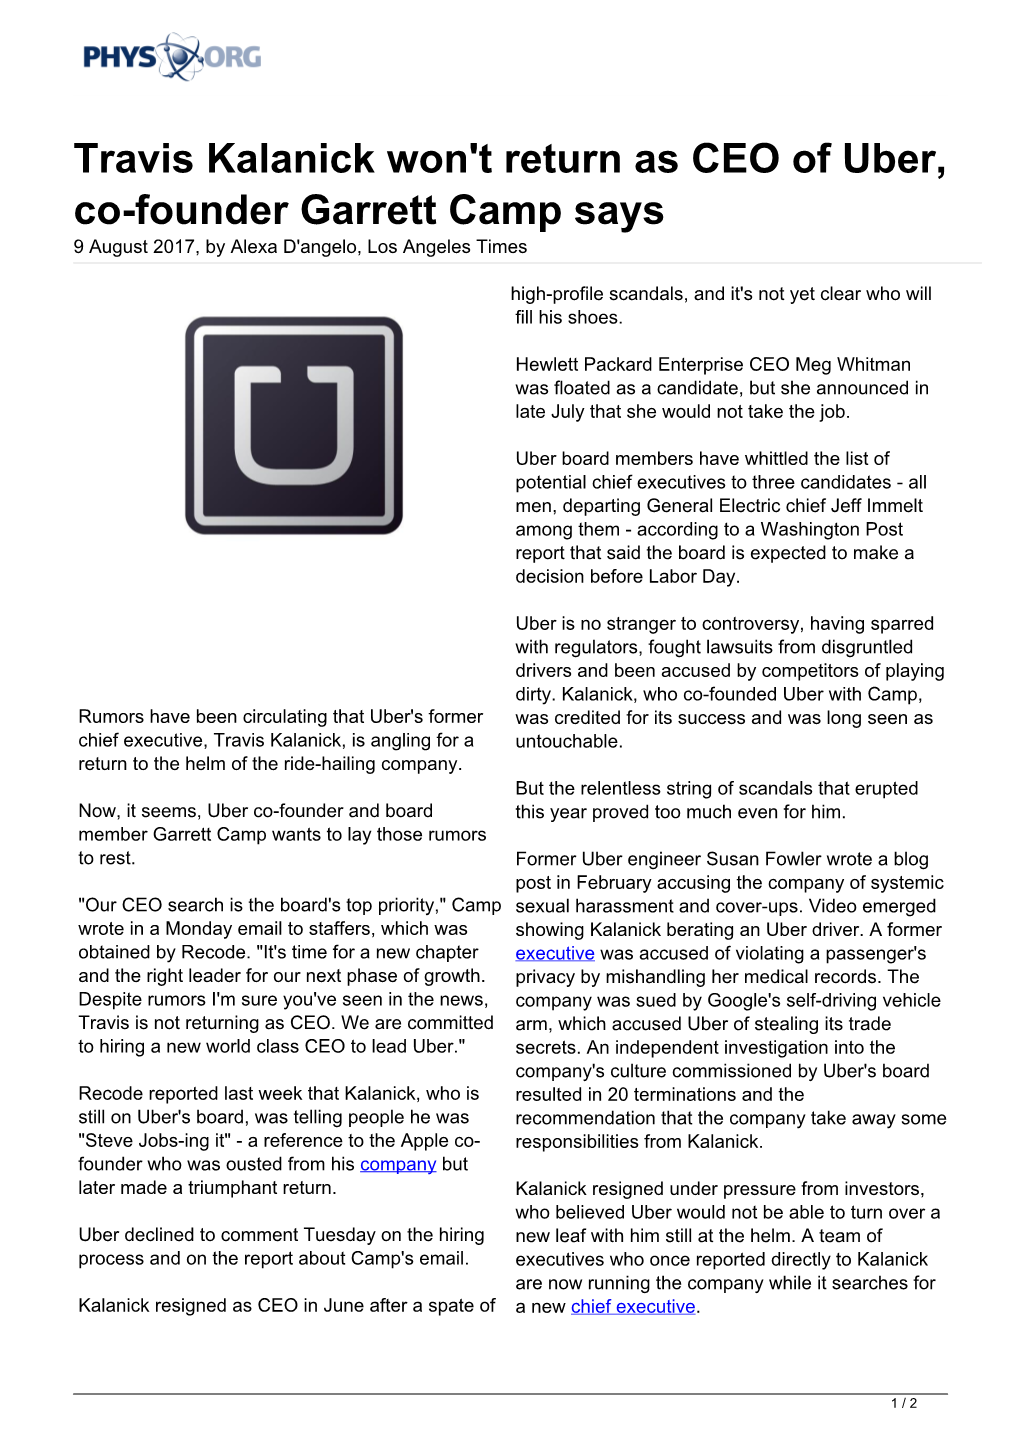 Travis Kalanick Won't Return As CEO of Uber, Co-Founder Garrett Camp Says 9 August 2017, by Alexa D'angelo, Los Angeles Times